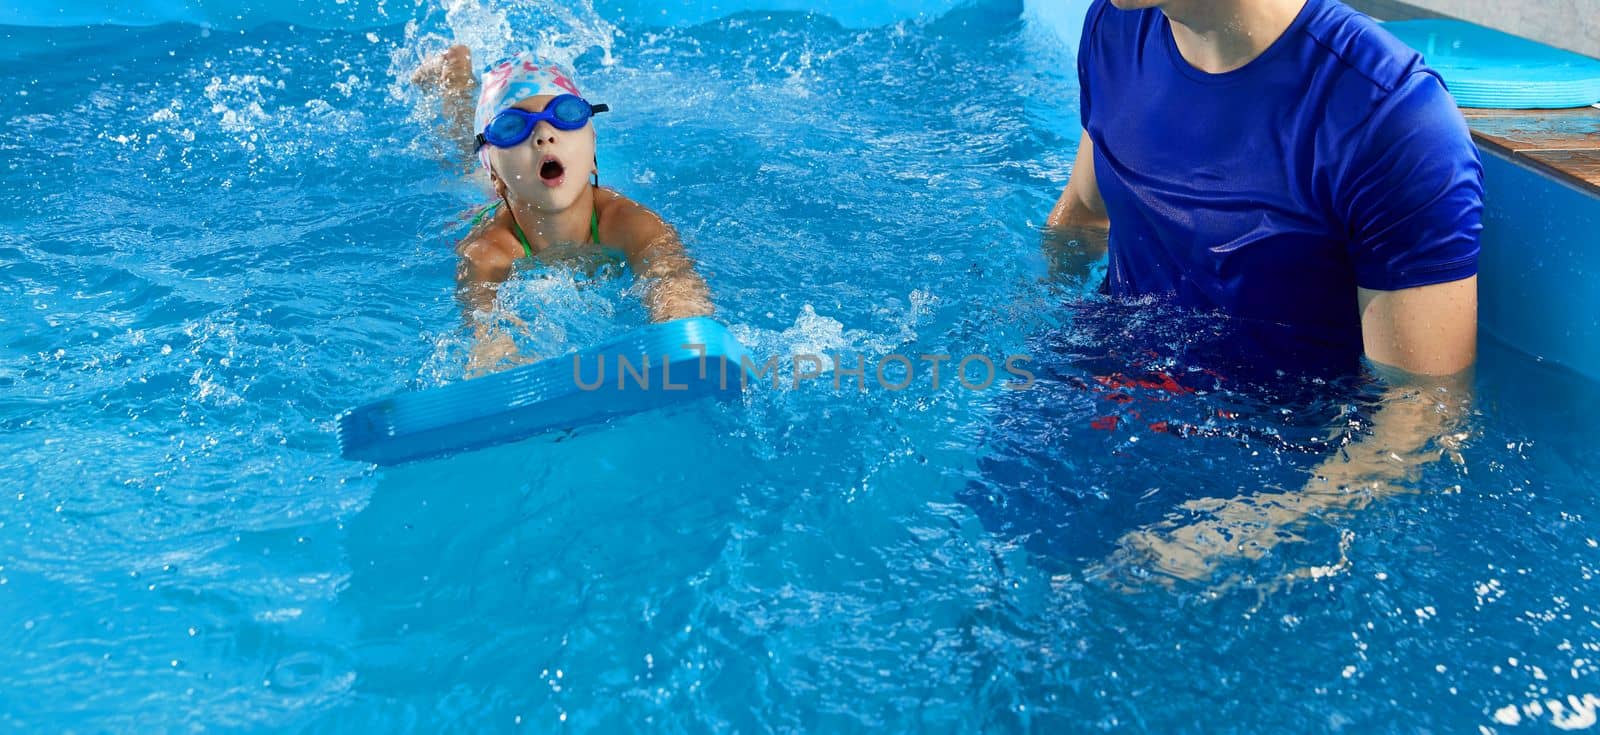 Little girl learning to swim in indoor pool with pool board. Swimming lesson. Active child swims in water with teacher